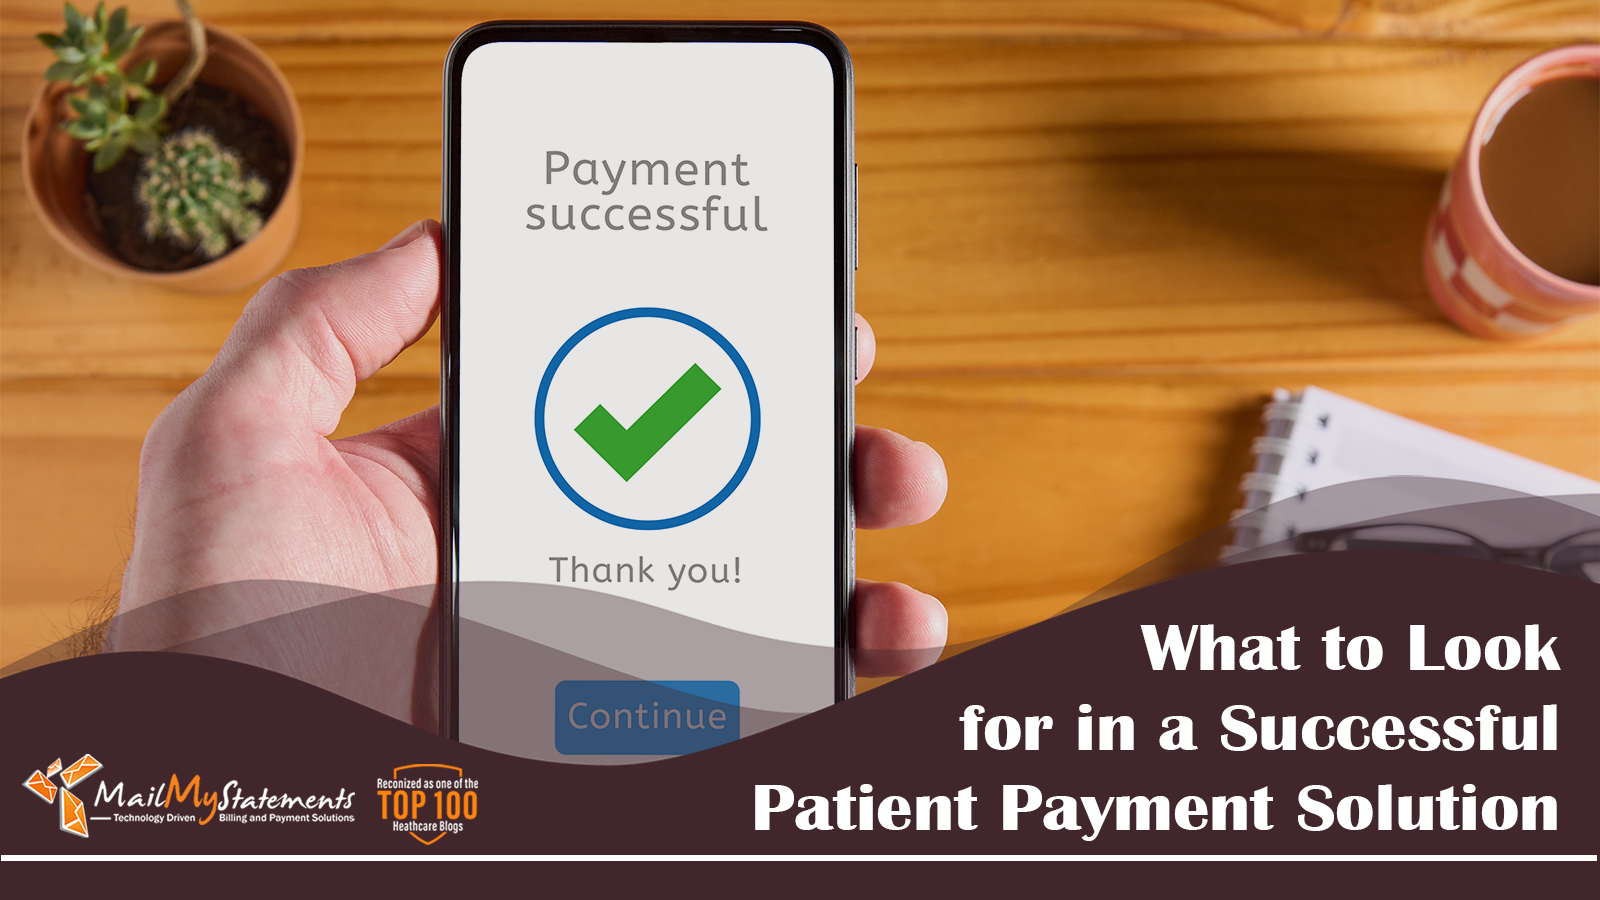 What to Look for in a Successful Patient Payment Solution